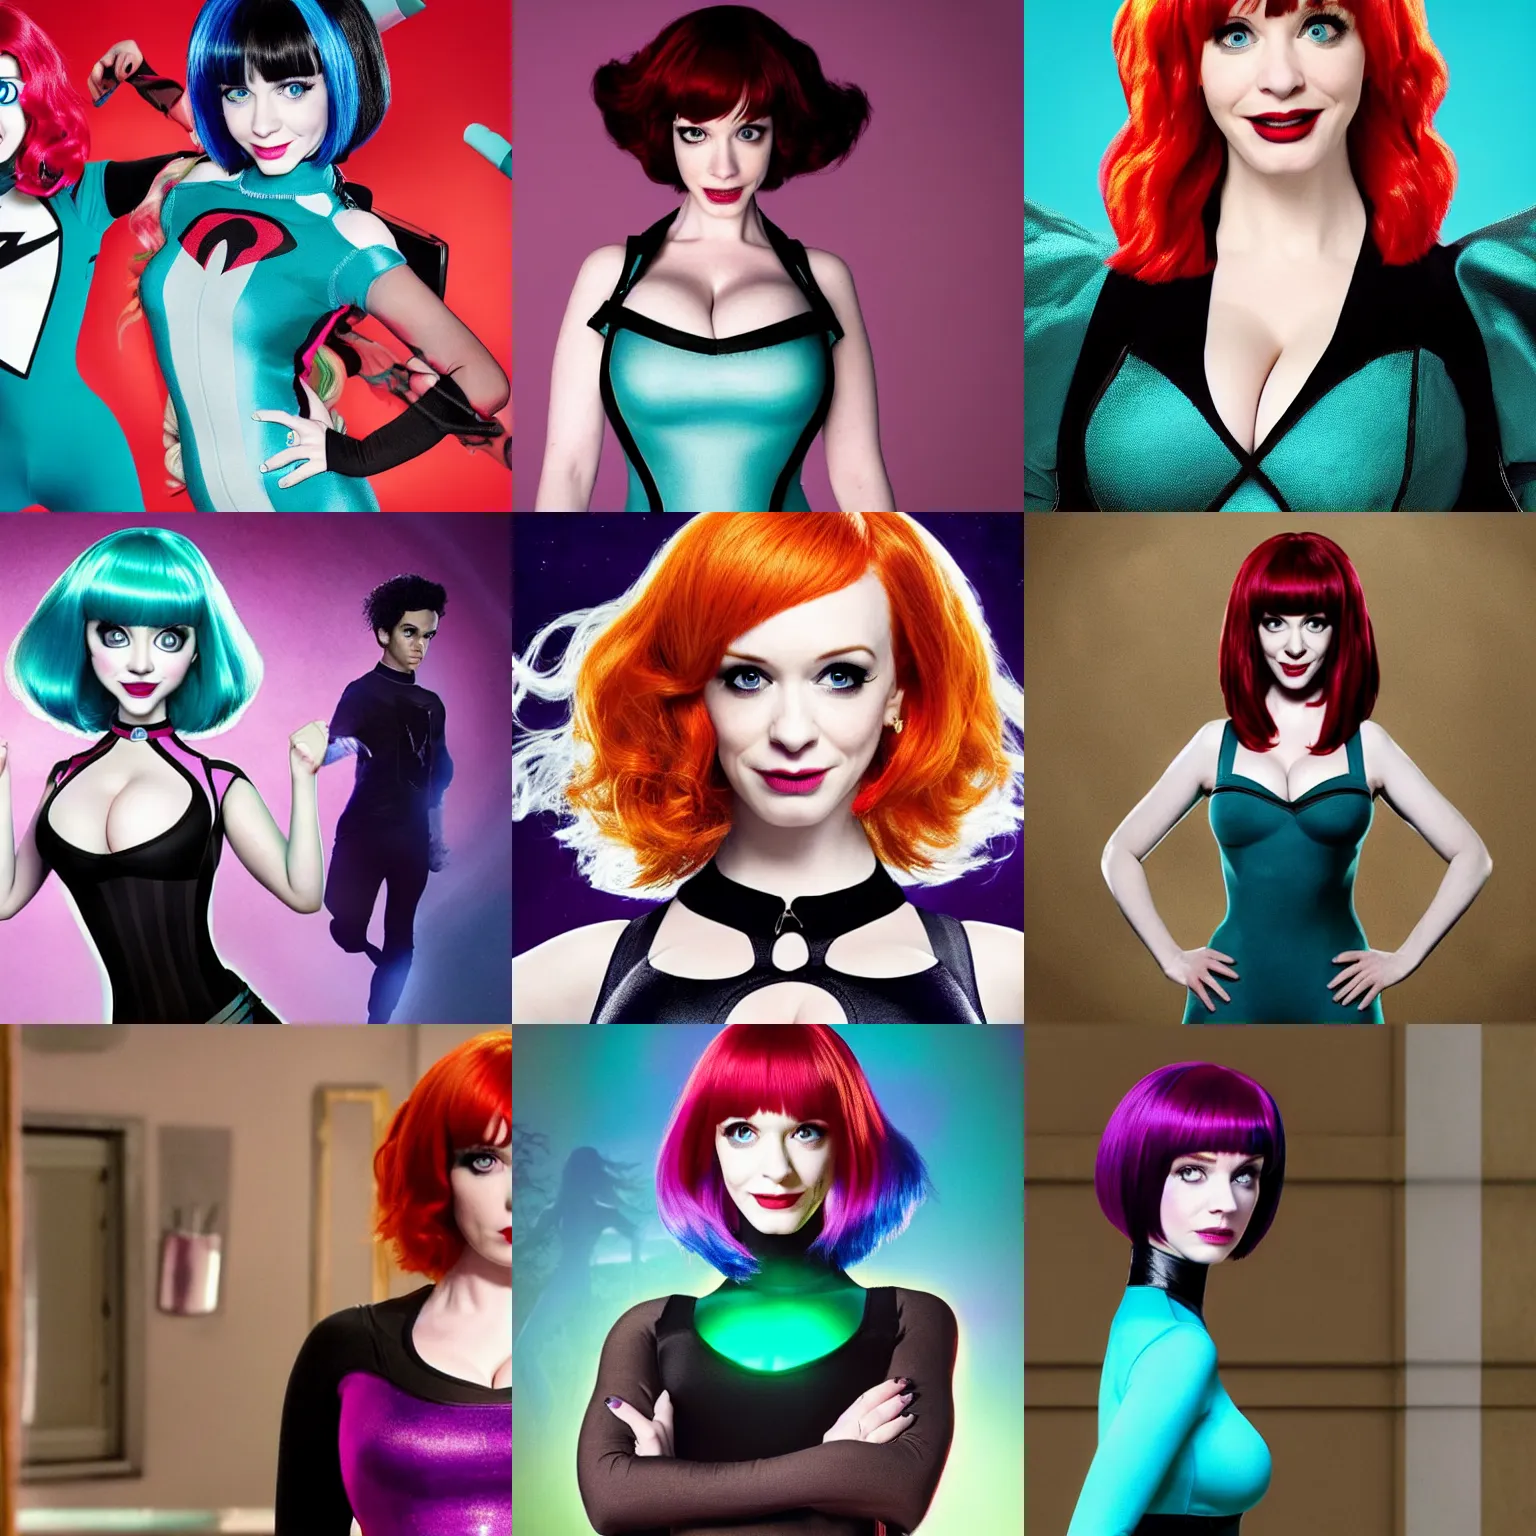 Prompt: christina hendricks as maddie fenton in the live - action netflix adaptation of danny phantom, promotional image ; she has auburn hair and a bob cut with straight bangs ; she is wearing a tight teal bodysuit with a black neck